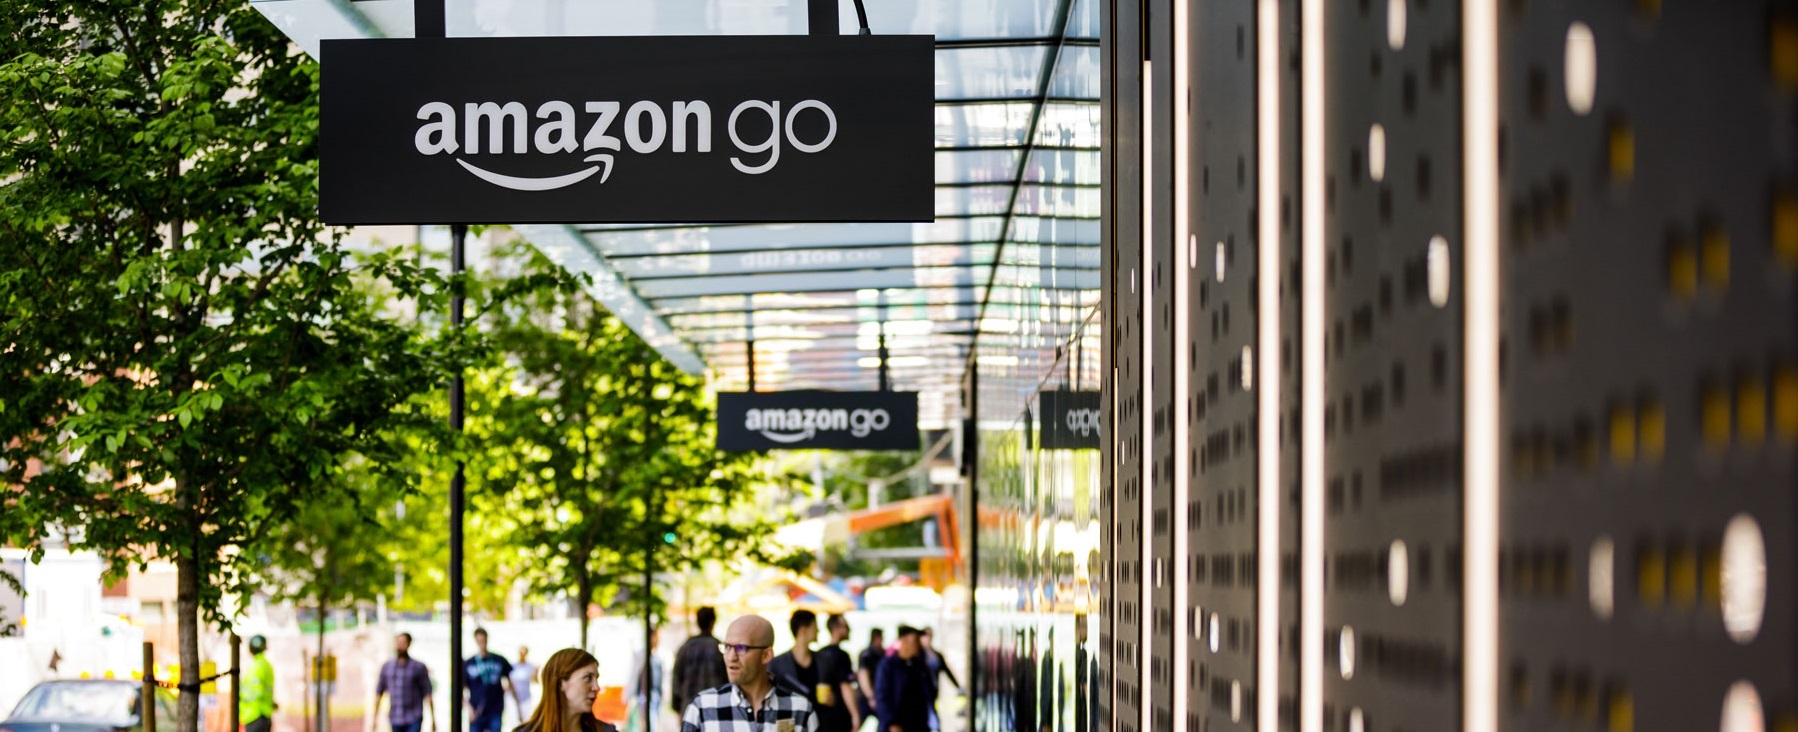 Amazon Go First Store 0